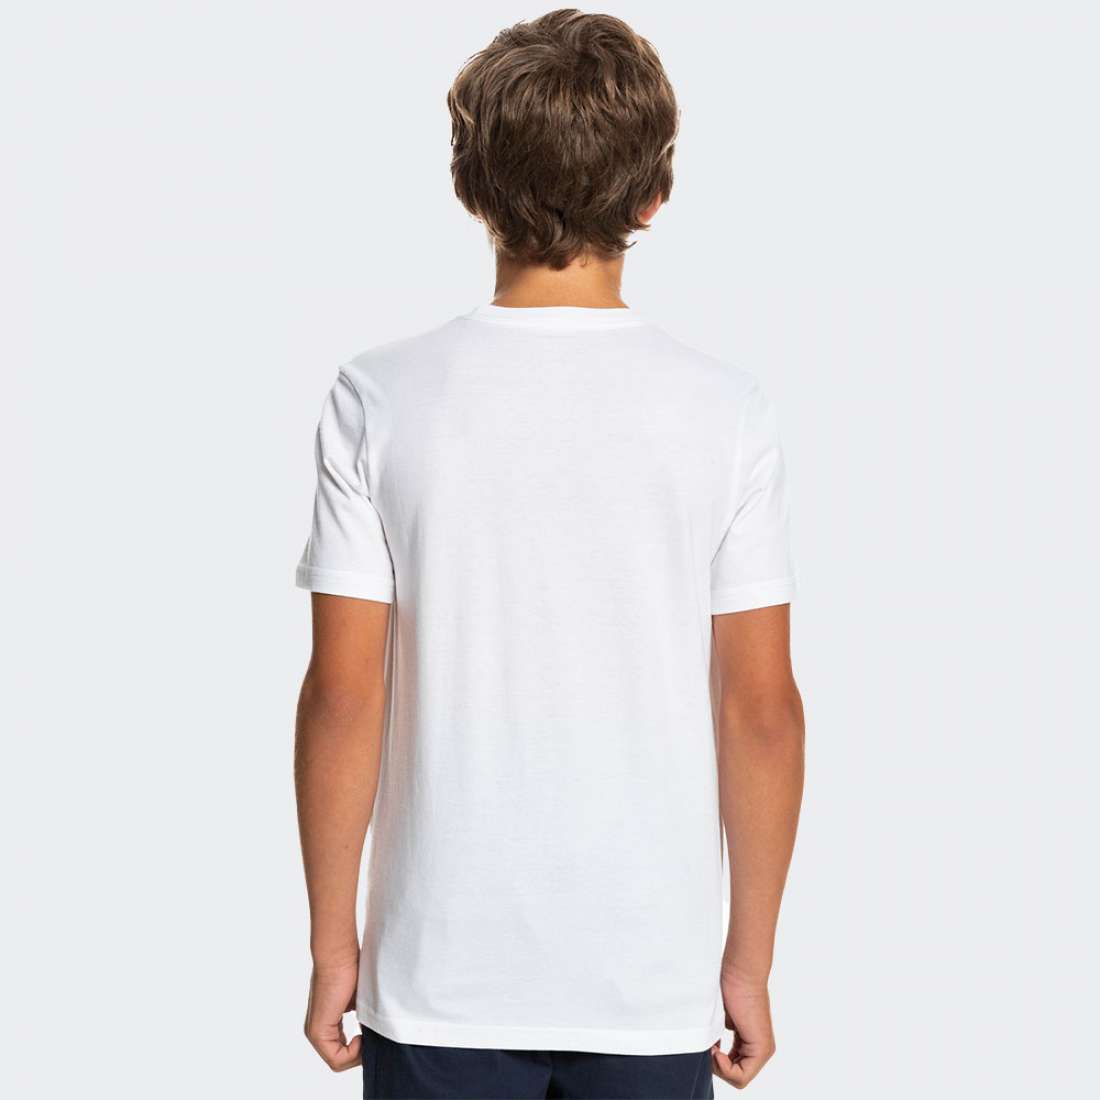 T-SHIRT QUIKSILVER LINED UP WHITE